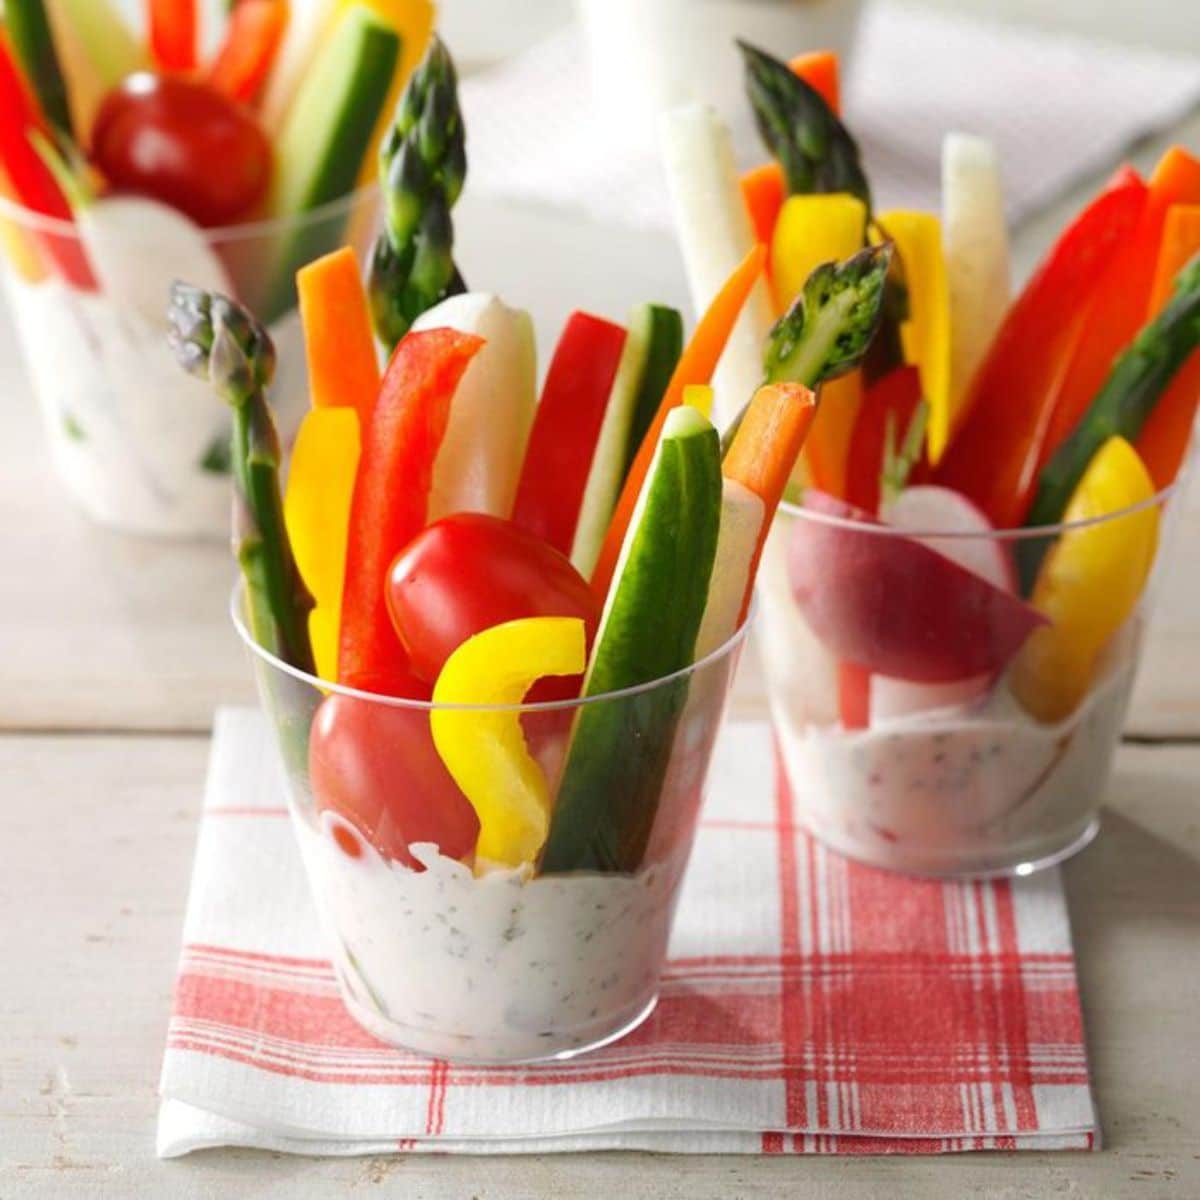 Dill Vegetable Dip in glass cups with sliced veggies.